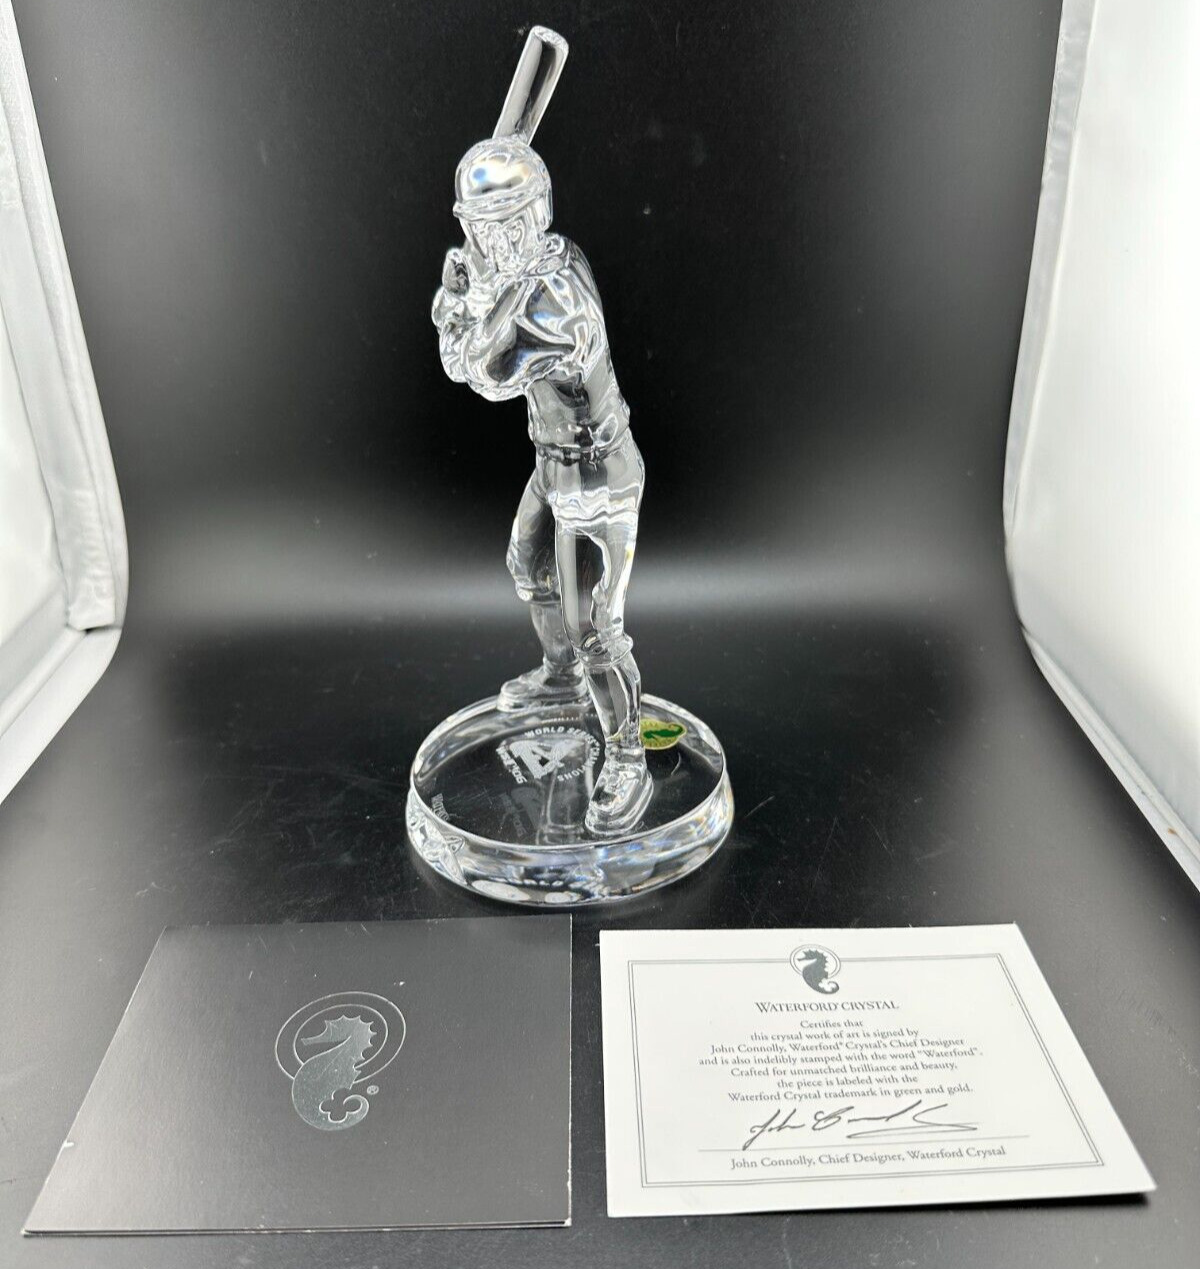 WATERFORD CRYSTAL ST. LOUIS CARDINALS 2006 WORLD SERIES FIGURINE - IN BOX